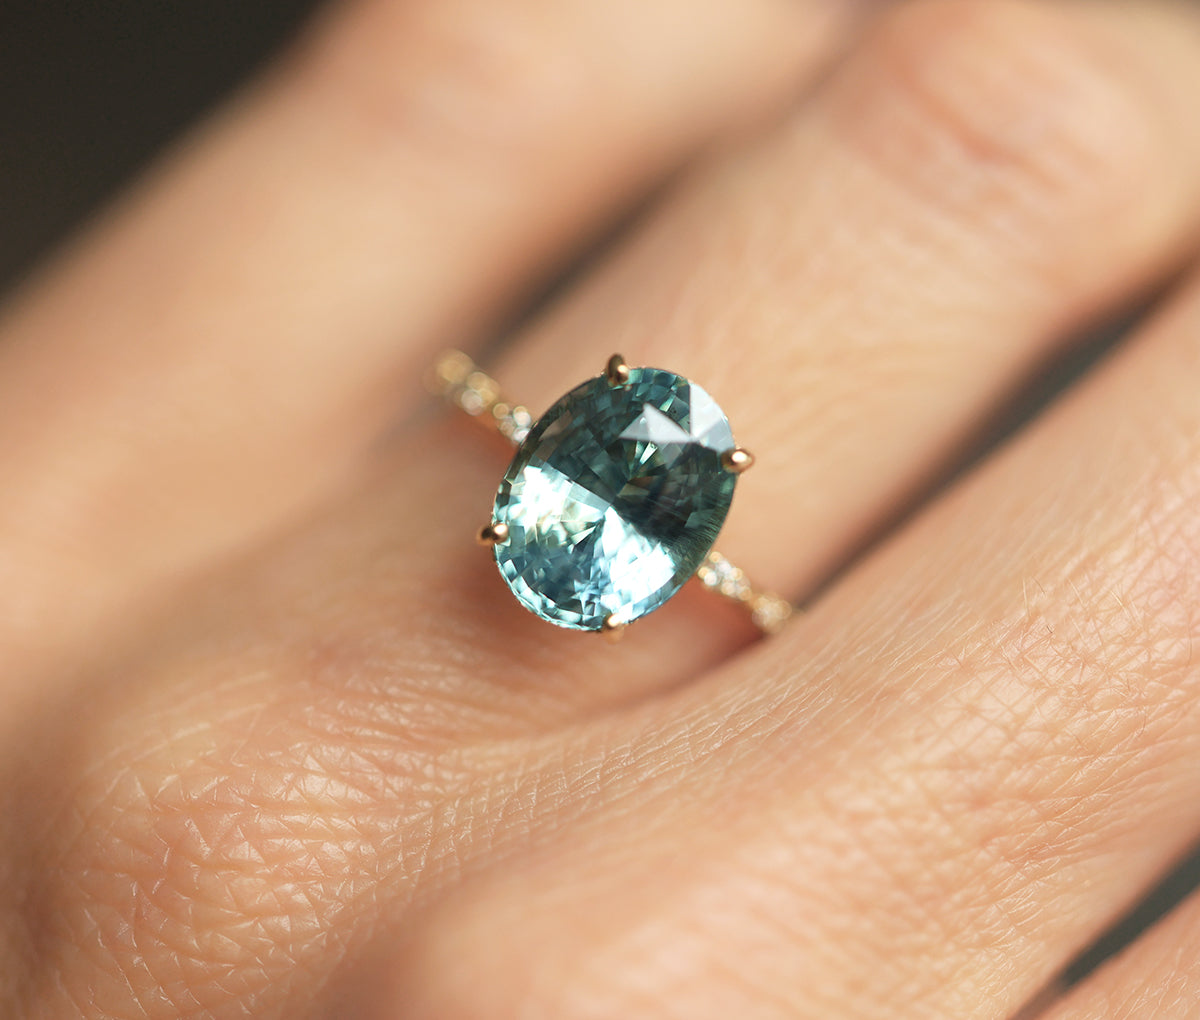 Mint-colored oval sapphire engagement ring with side diamonds